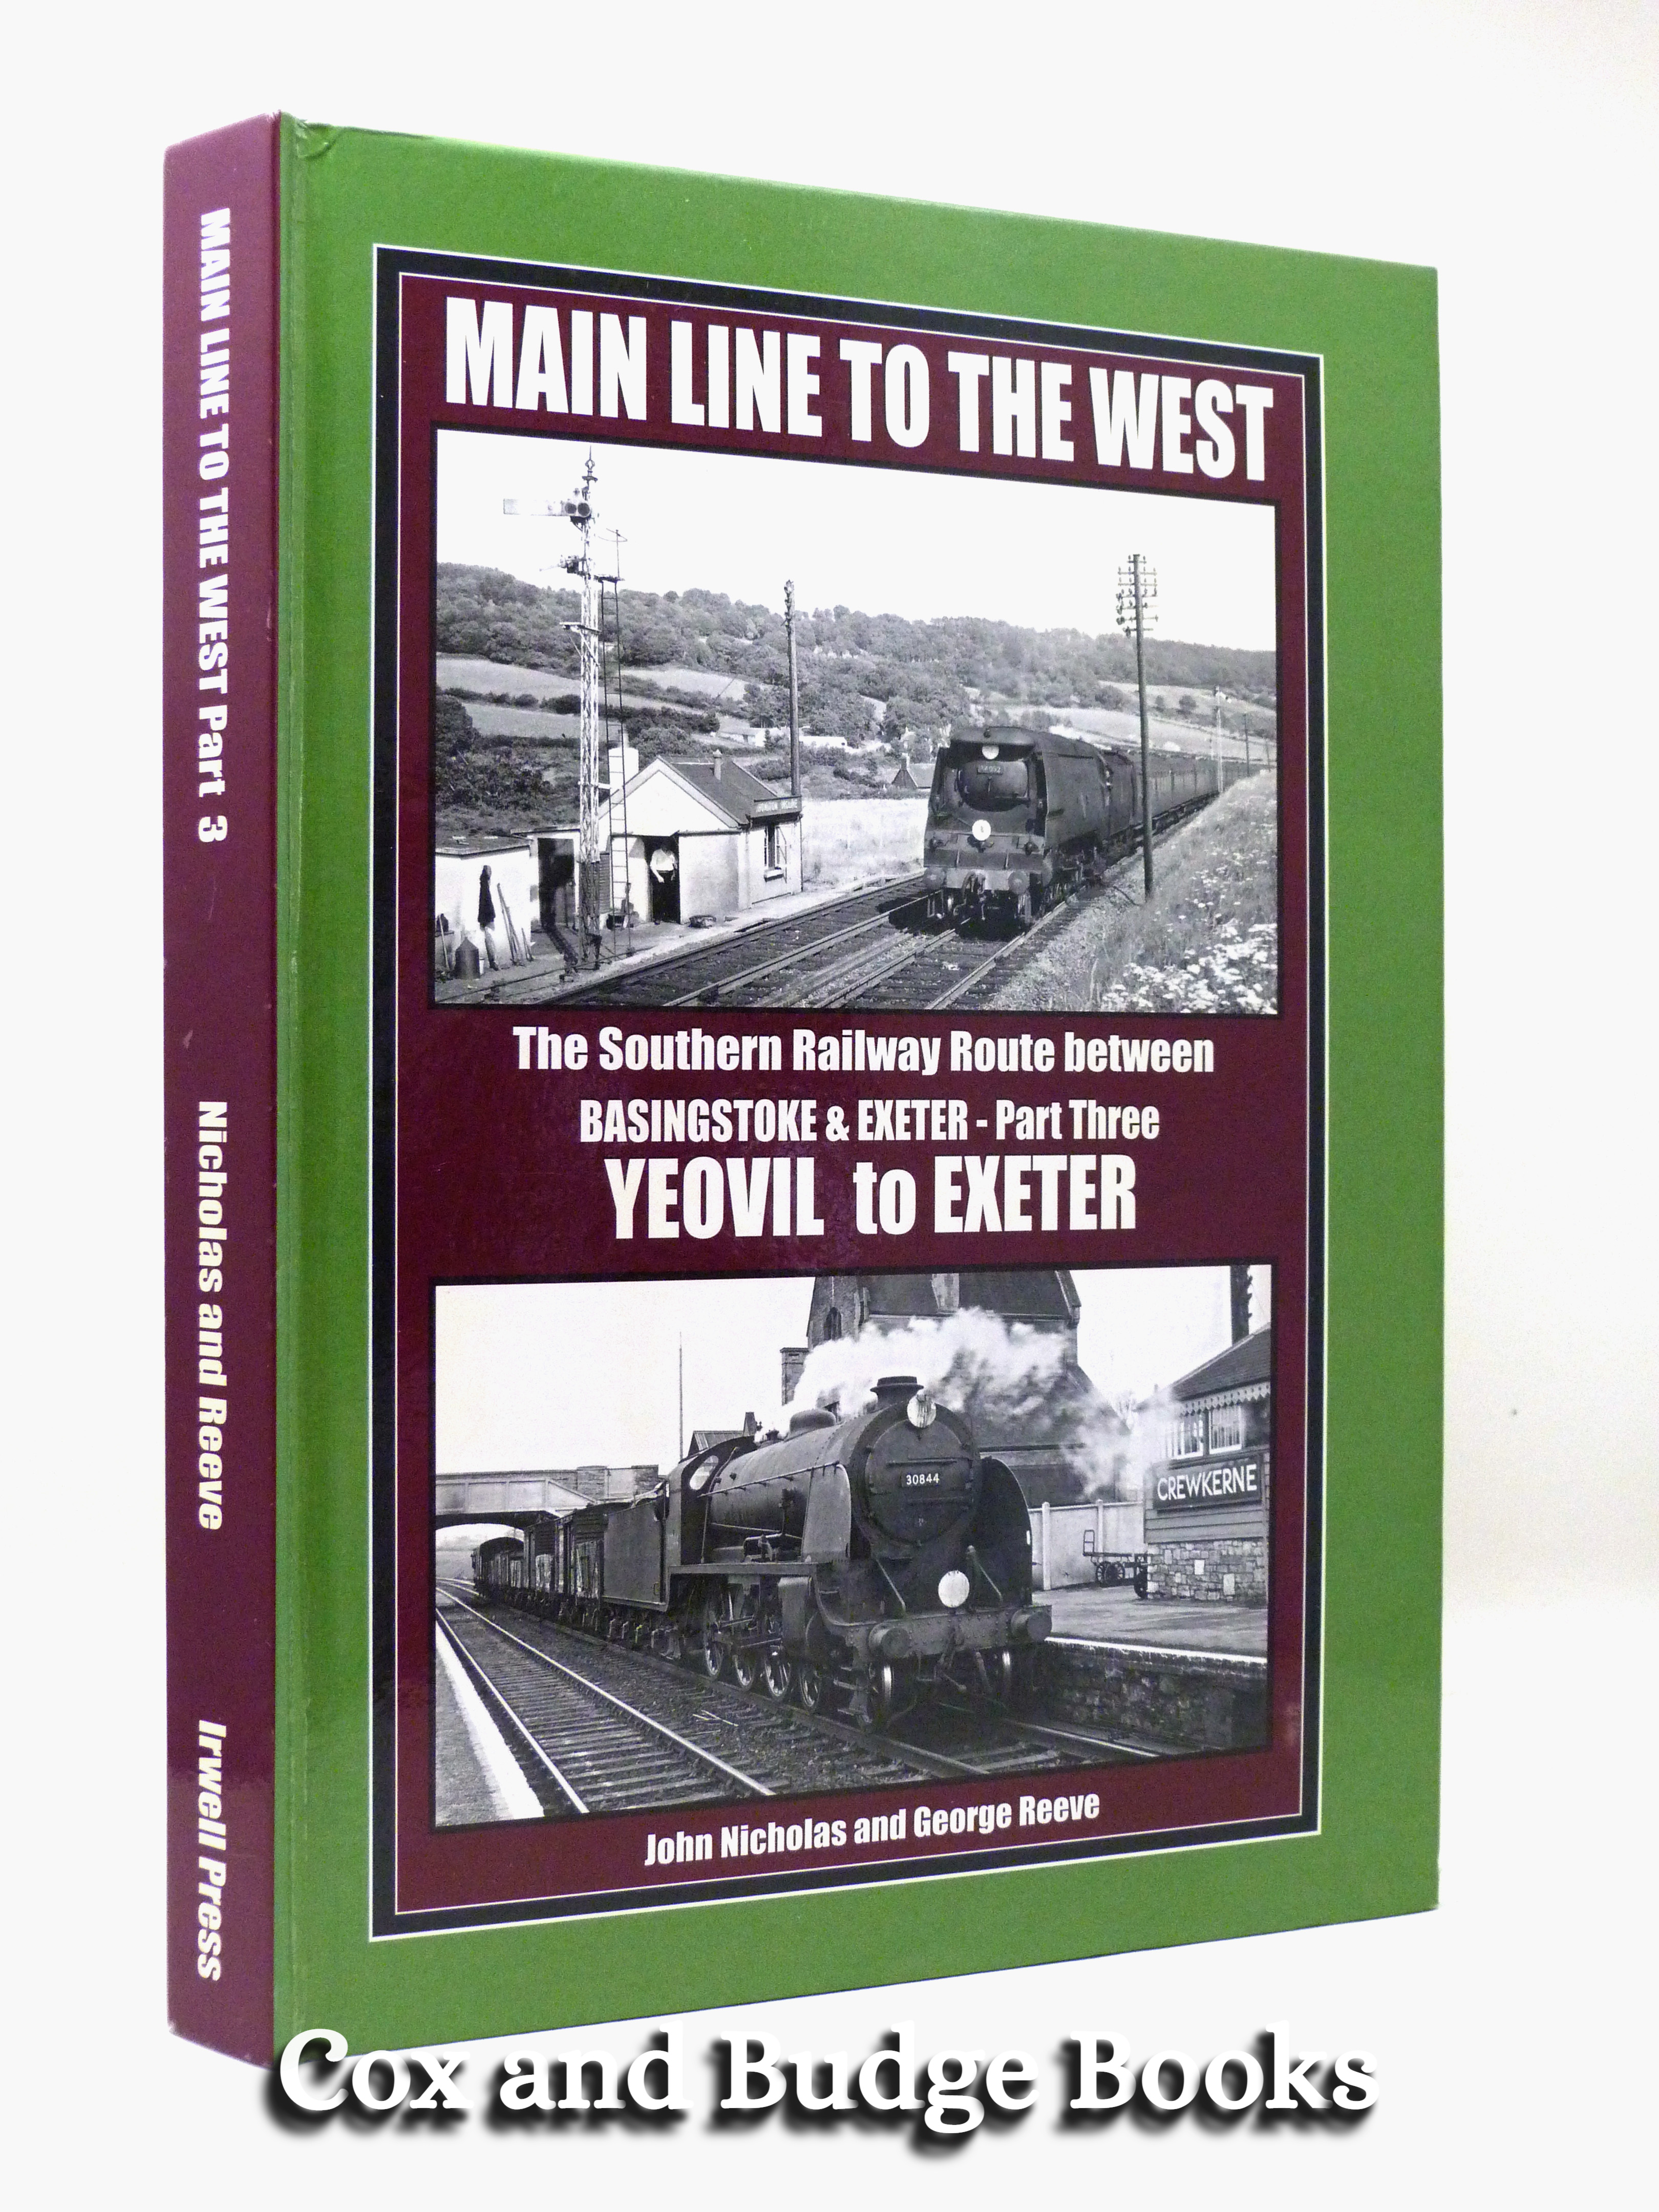 Main Line to the West: The Southern Railway Route between Basingstoke and Exeter, Part Three: Yeovil to Exeter - John Nicholas, and George Reeve